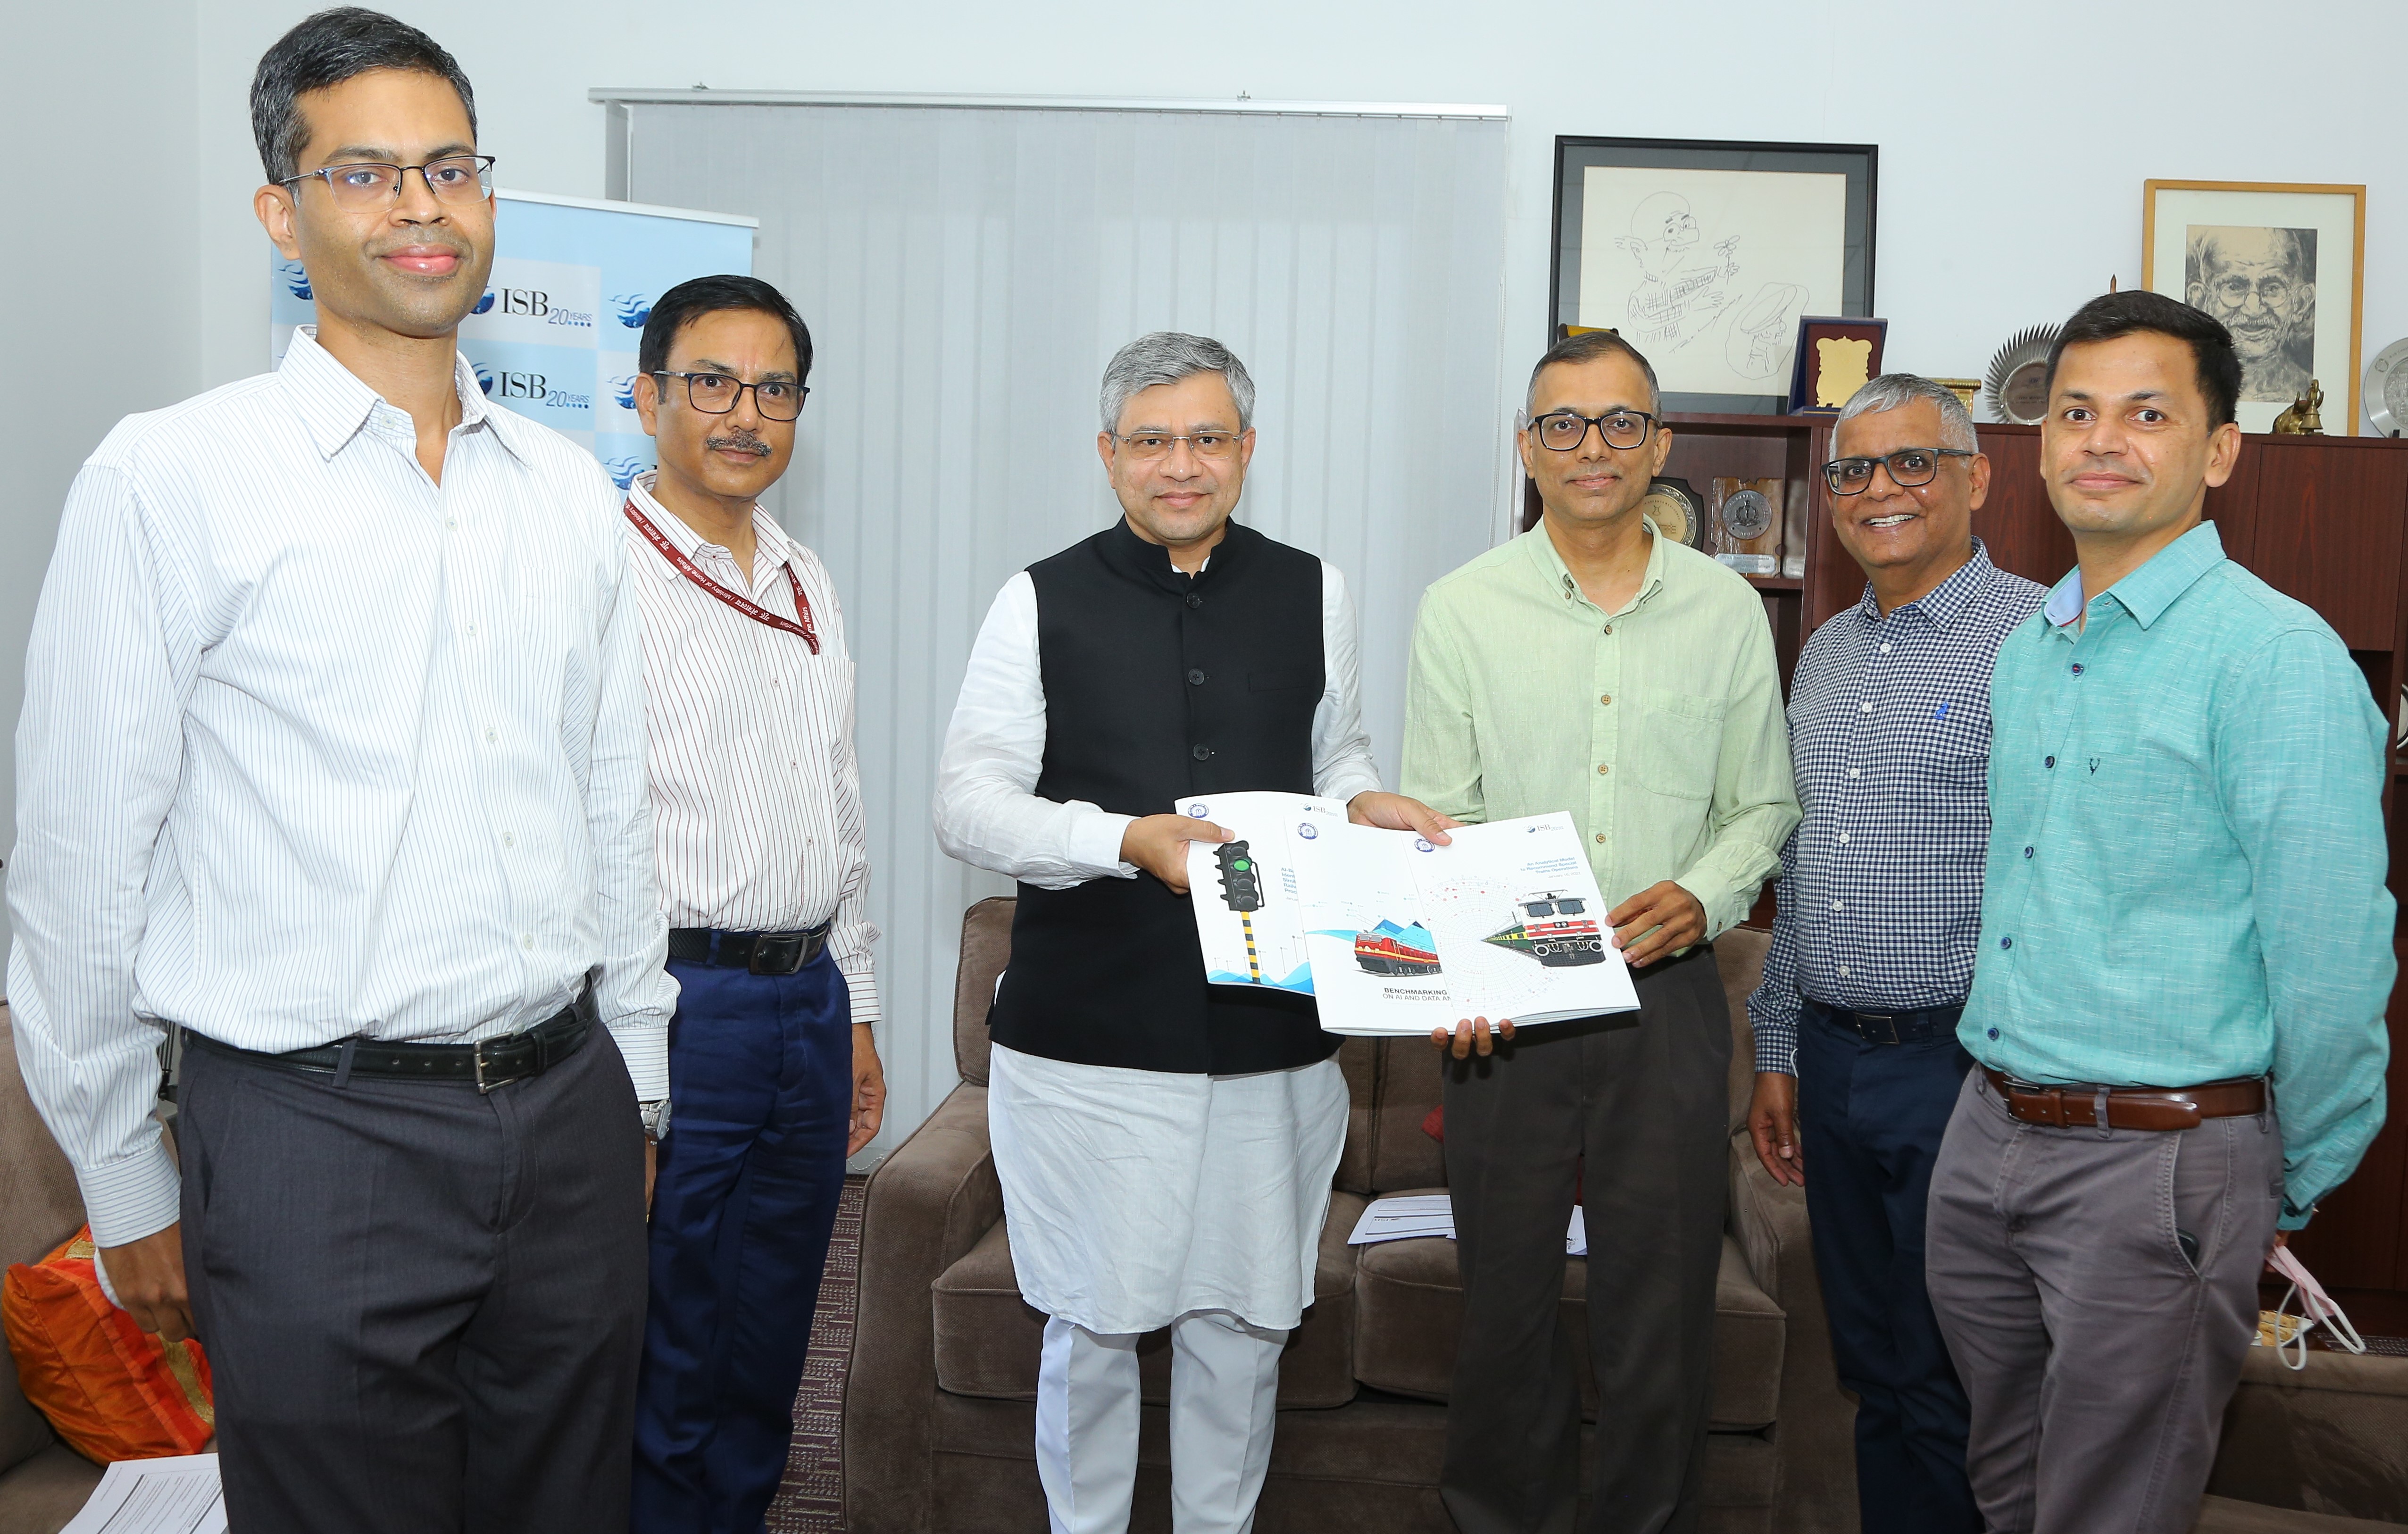 Milind Sohoni, Professor of Operations Management, ISB,  presenting a copy of research reports on Indian Railways prepared by ISB faculty to the Hon'ble Railways Minister, Shri Ashwini Vaishnaw.